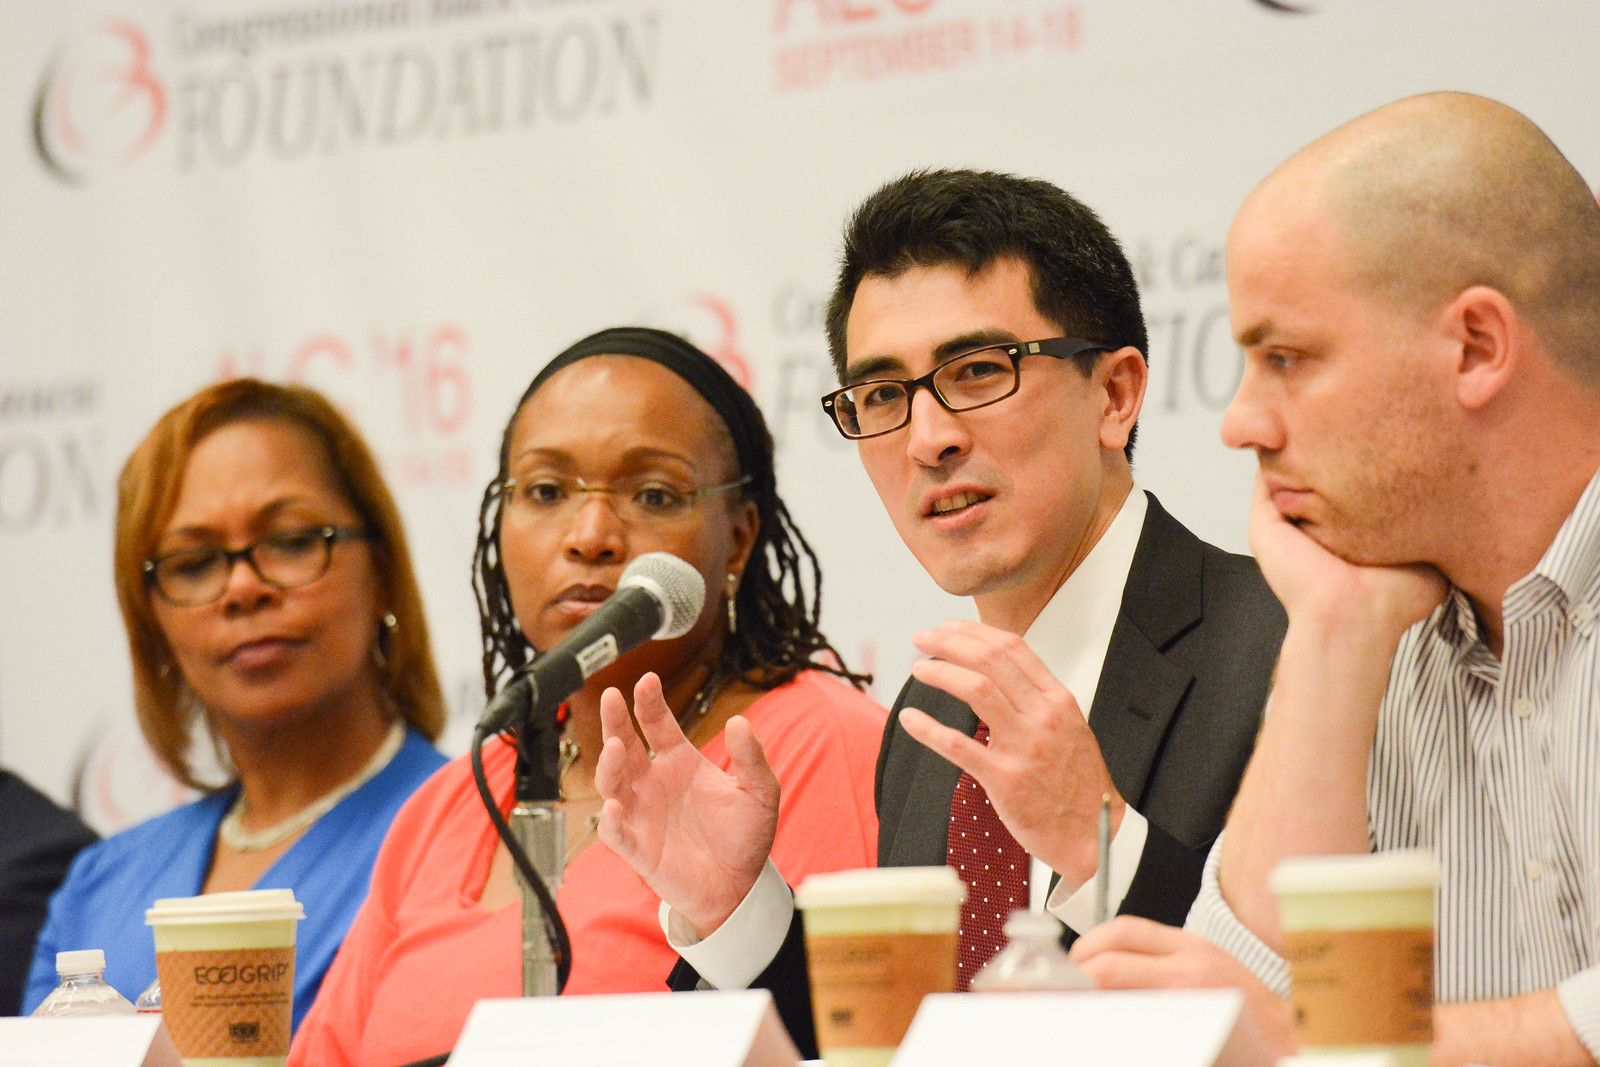 CBCF Annual Legislative Conference Panel - Justice Not Profits: Exploration of our Failed For-Profit Prison Industry